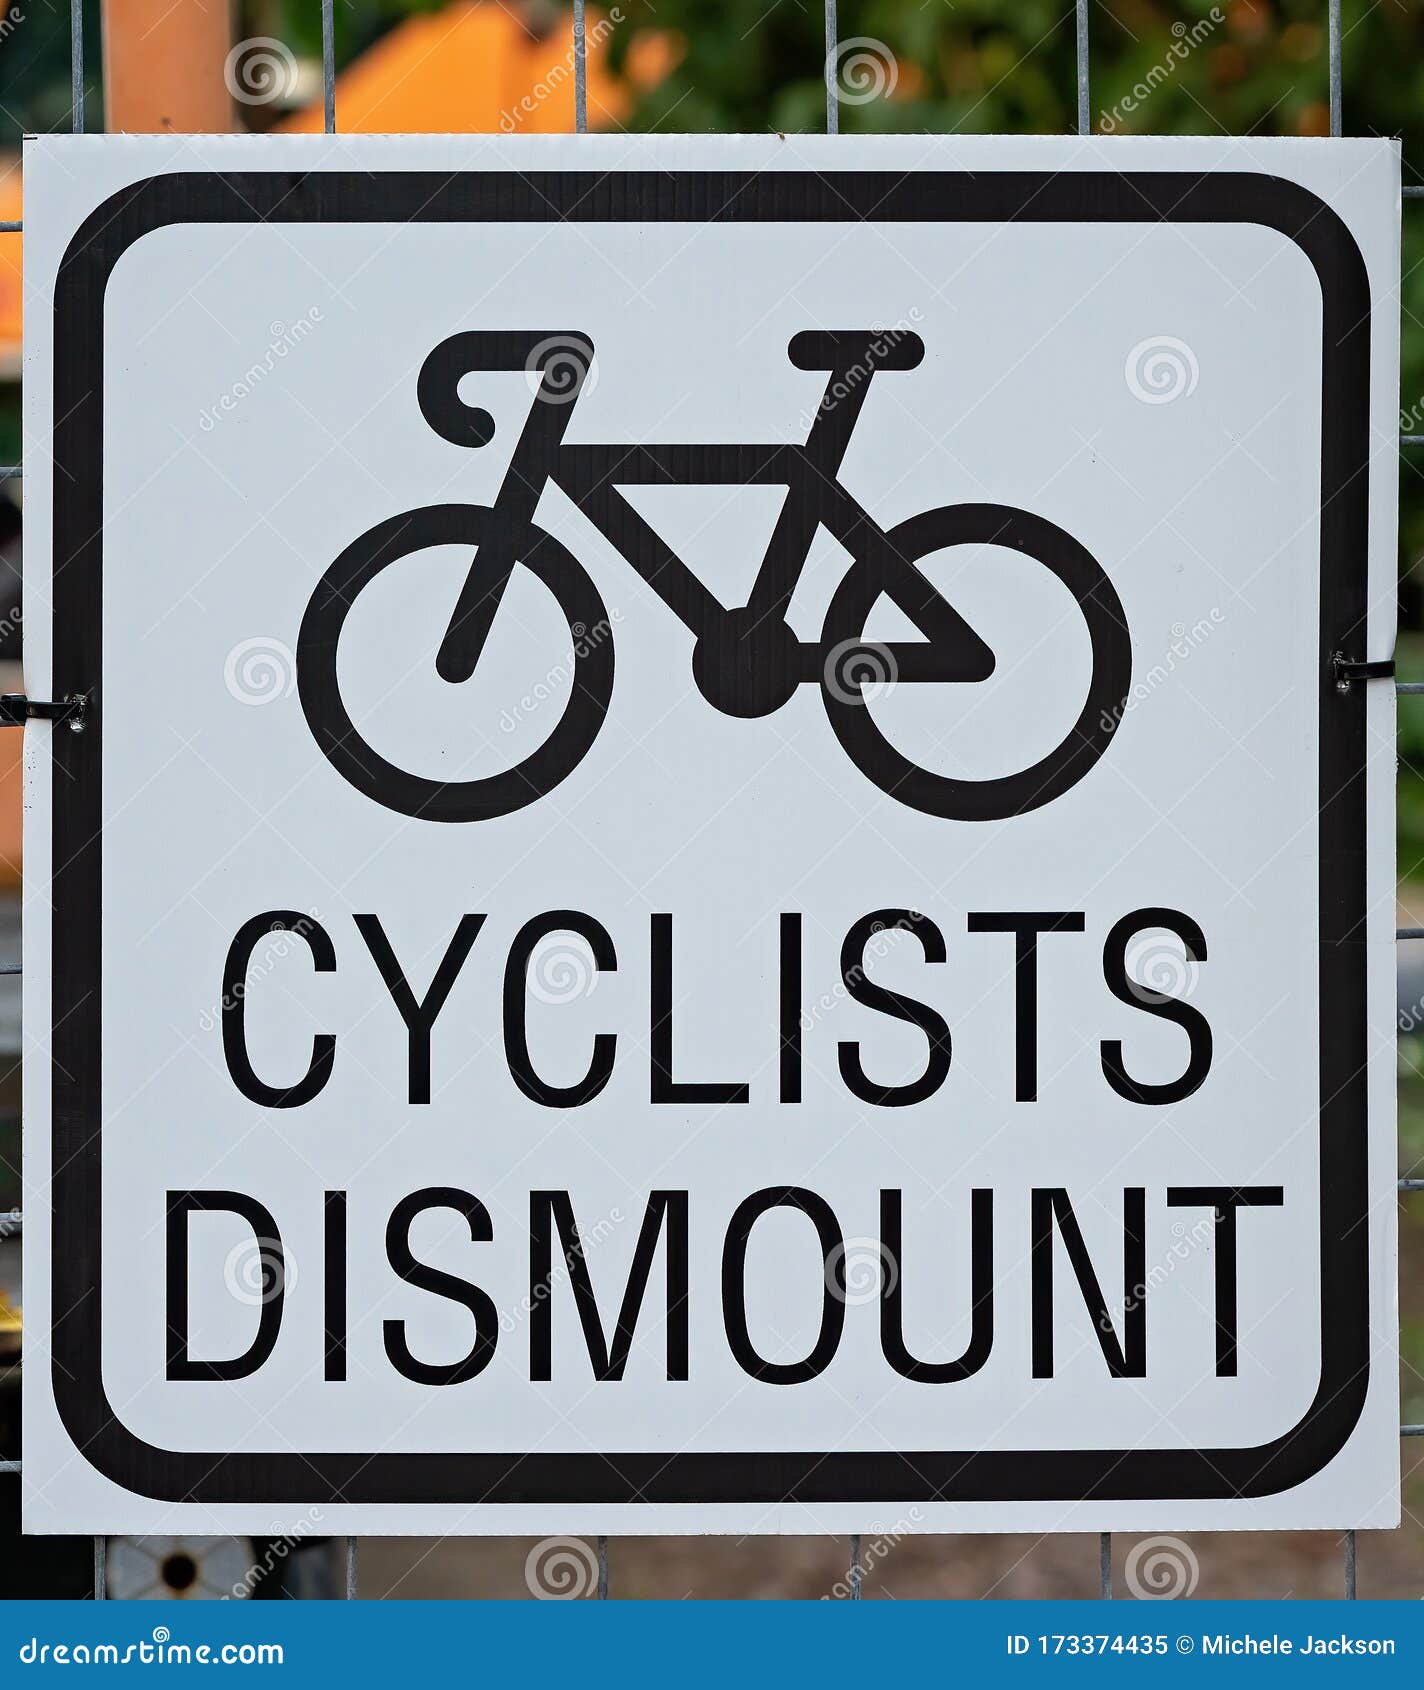 Cyclists please dismount sign 